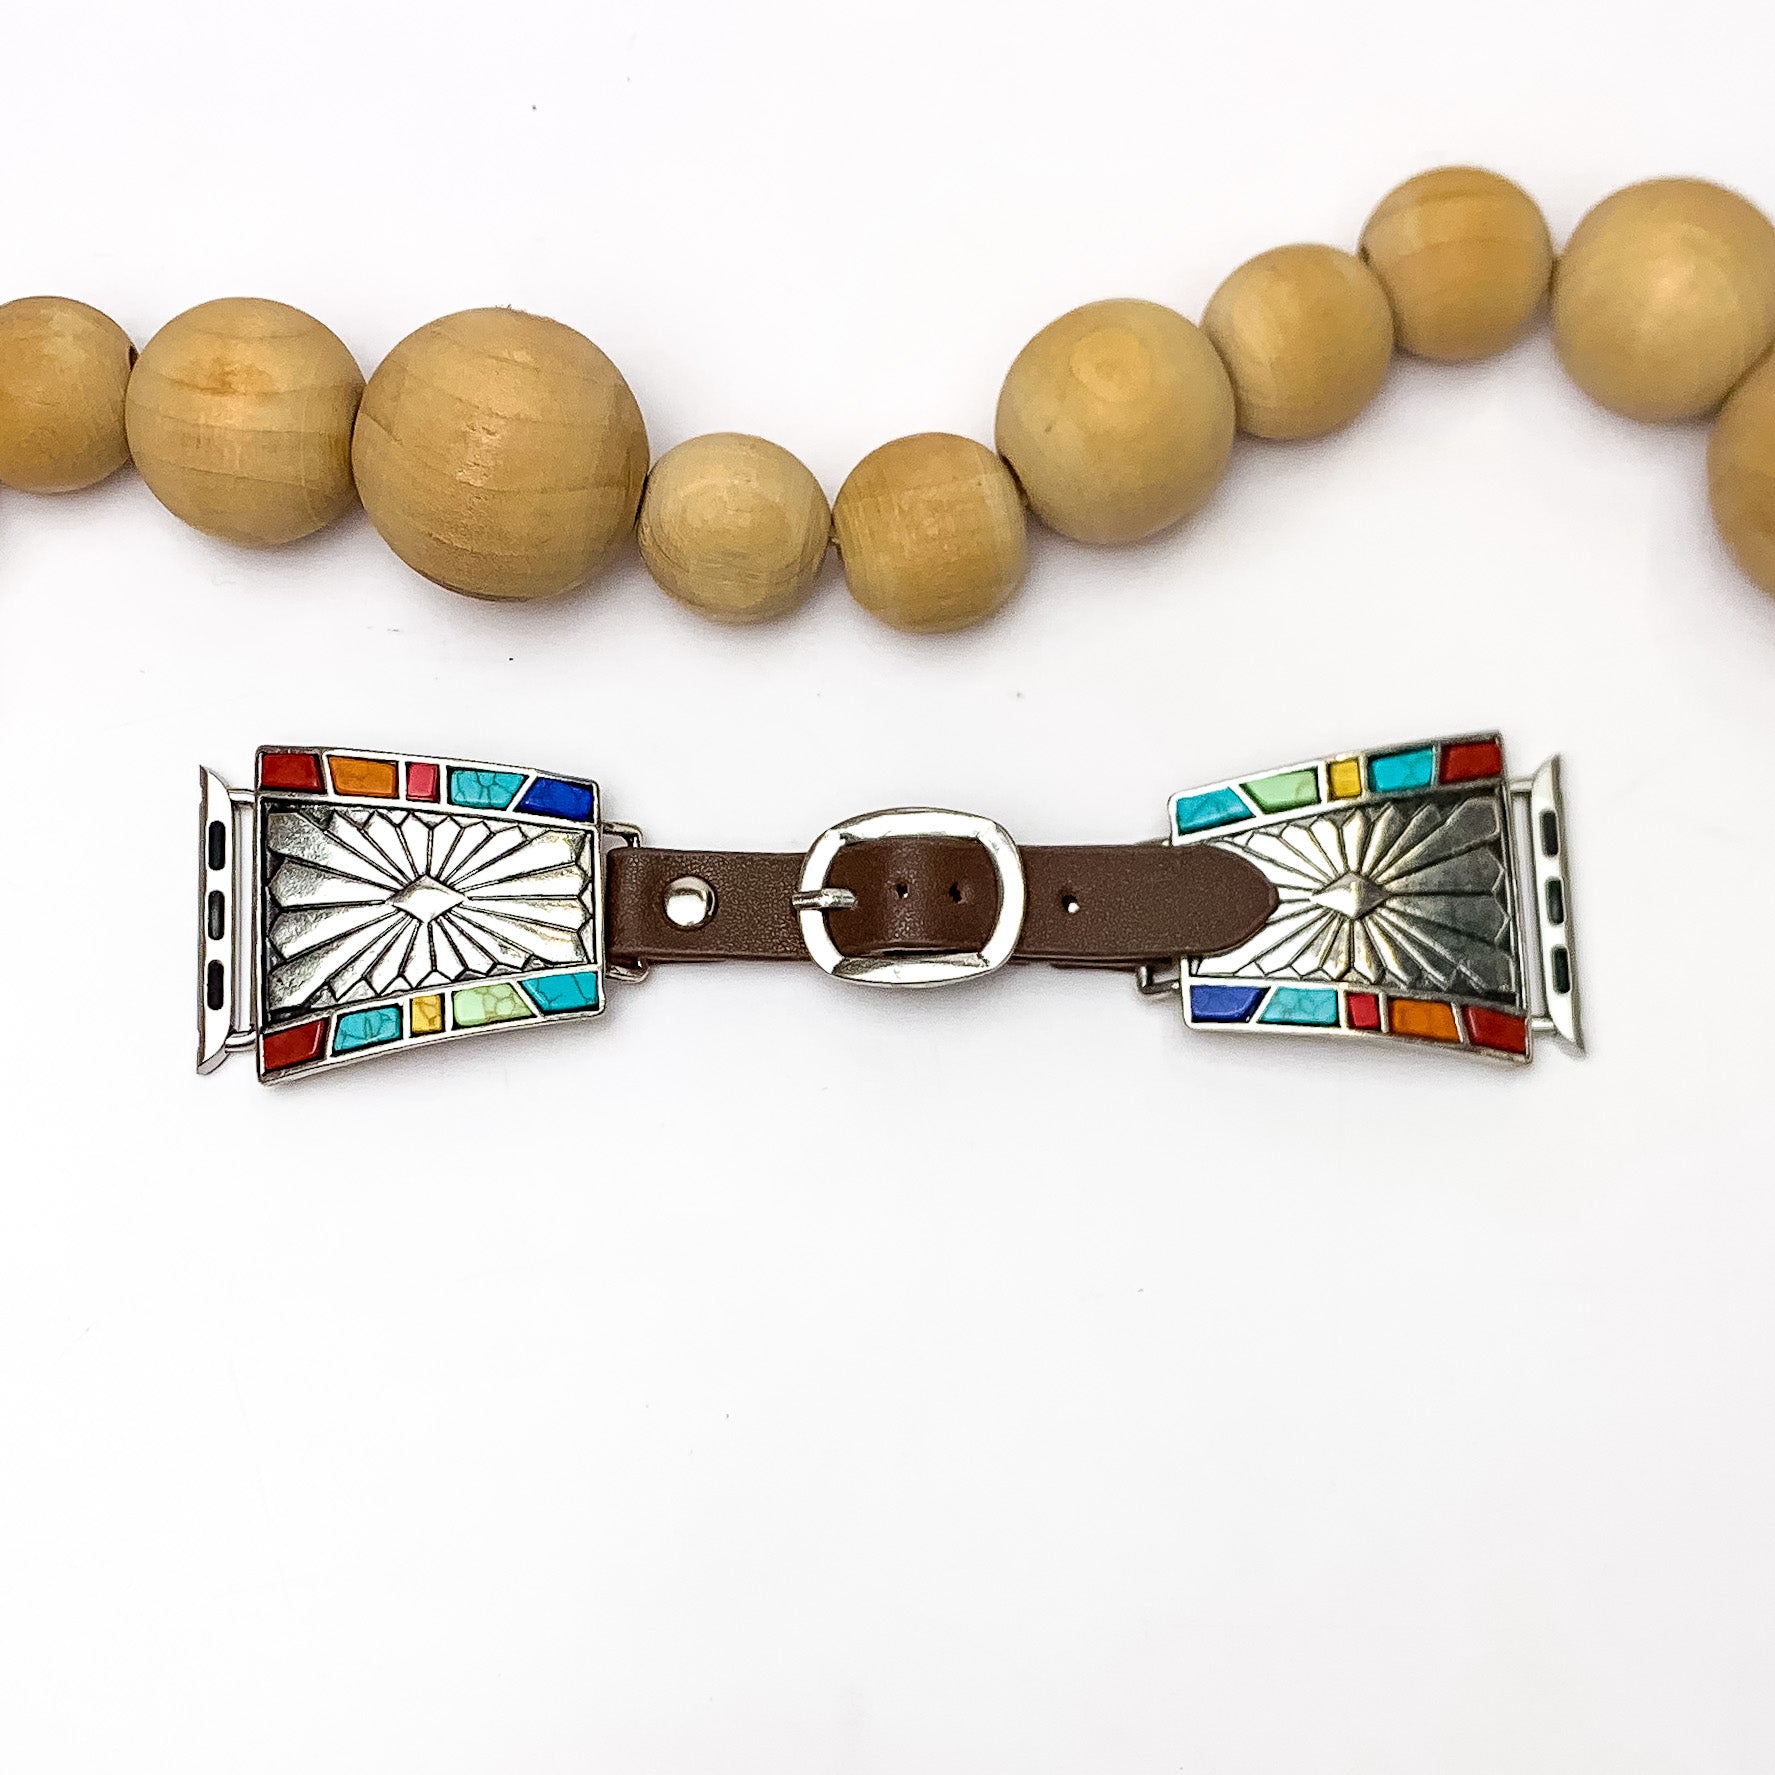 Brown Watch Band with Silver Tone Designs and Multicolor Stones. Pictured on a white background with wood beads above the watch band for decoration.